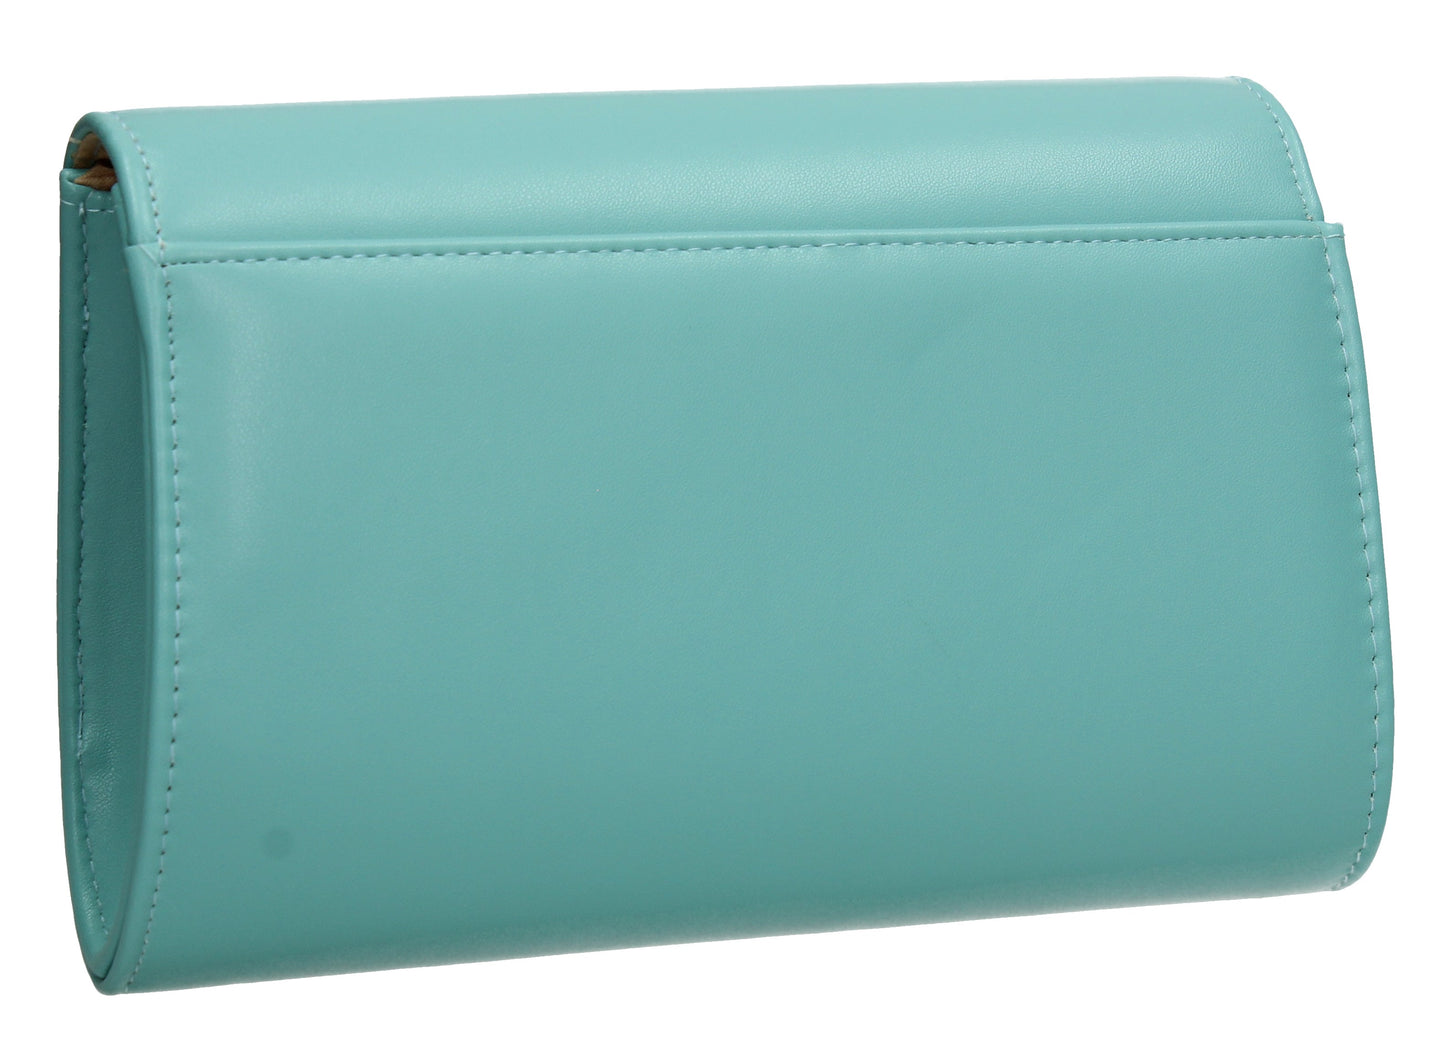 SWANKYSWANS Nylah Clutch Bag Turquoise Cute Cheap Clutch Bag For Weddings School and Work